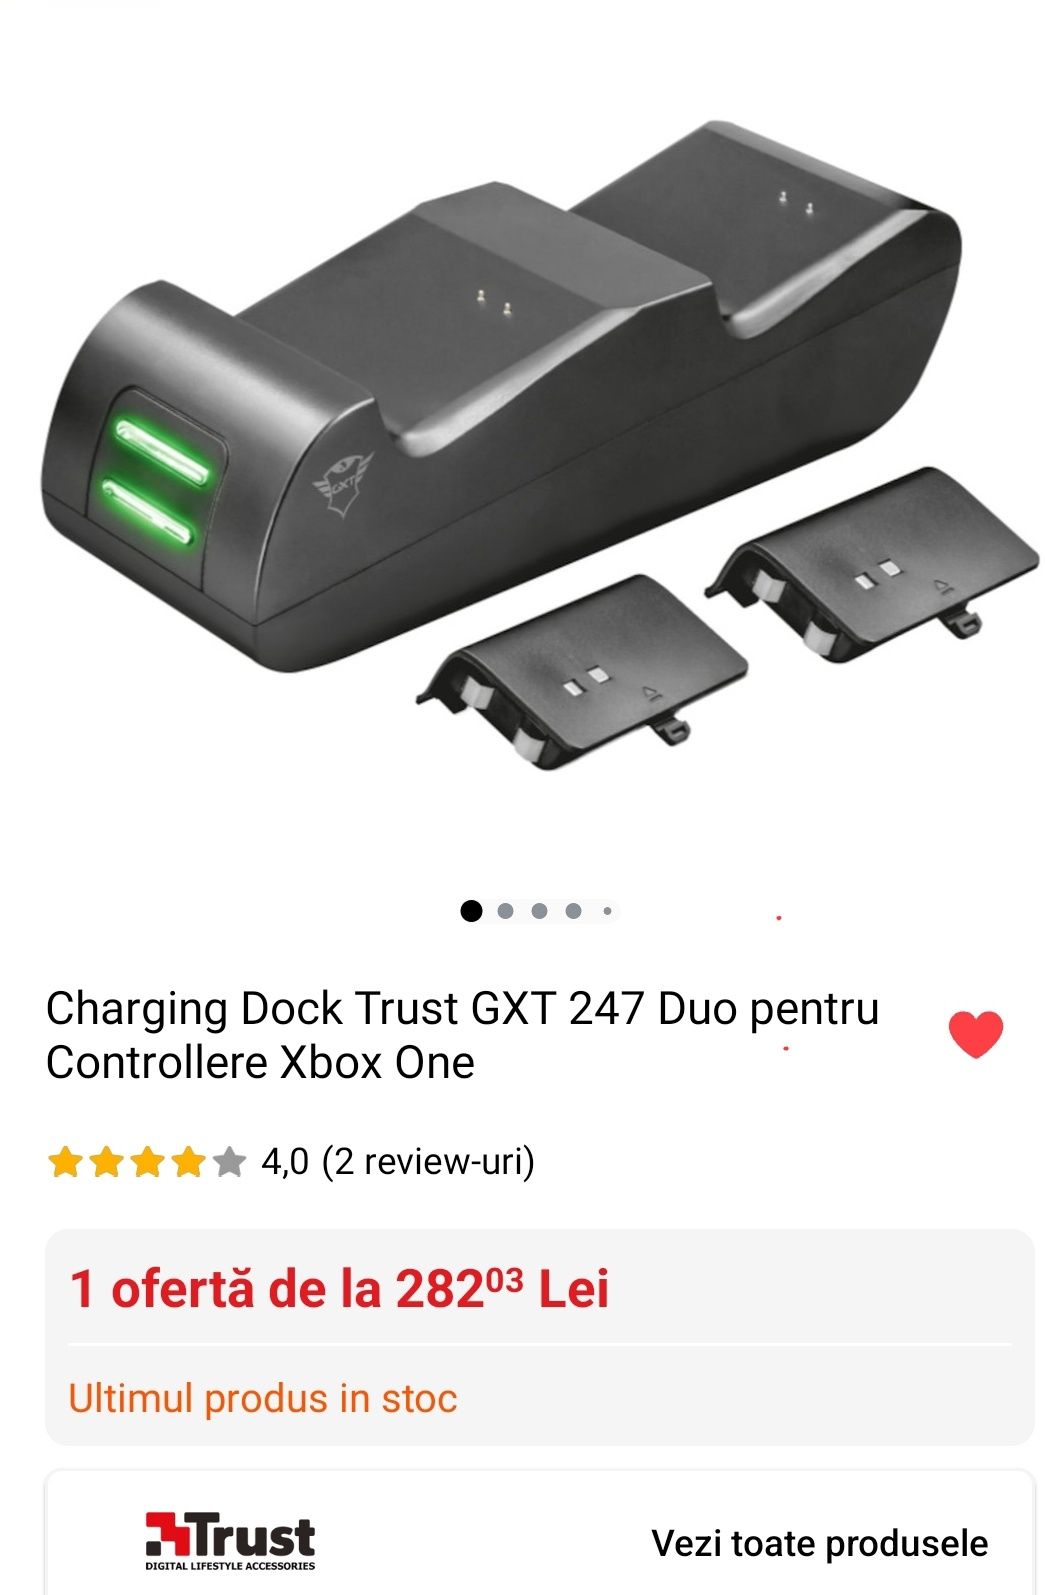 Trust GXT 247, Incarcator controler Xbox One,  duo charging dock